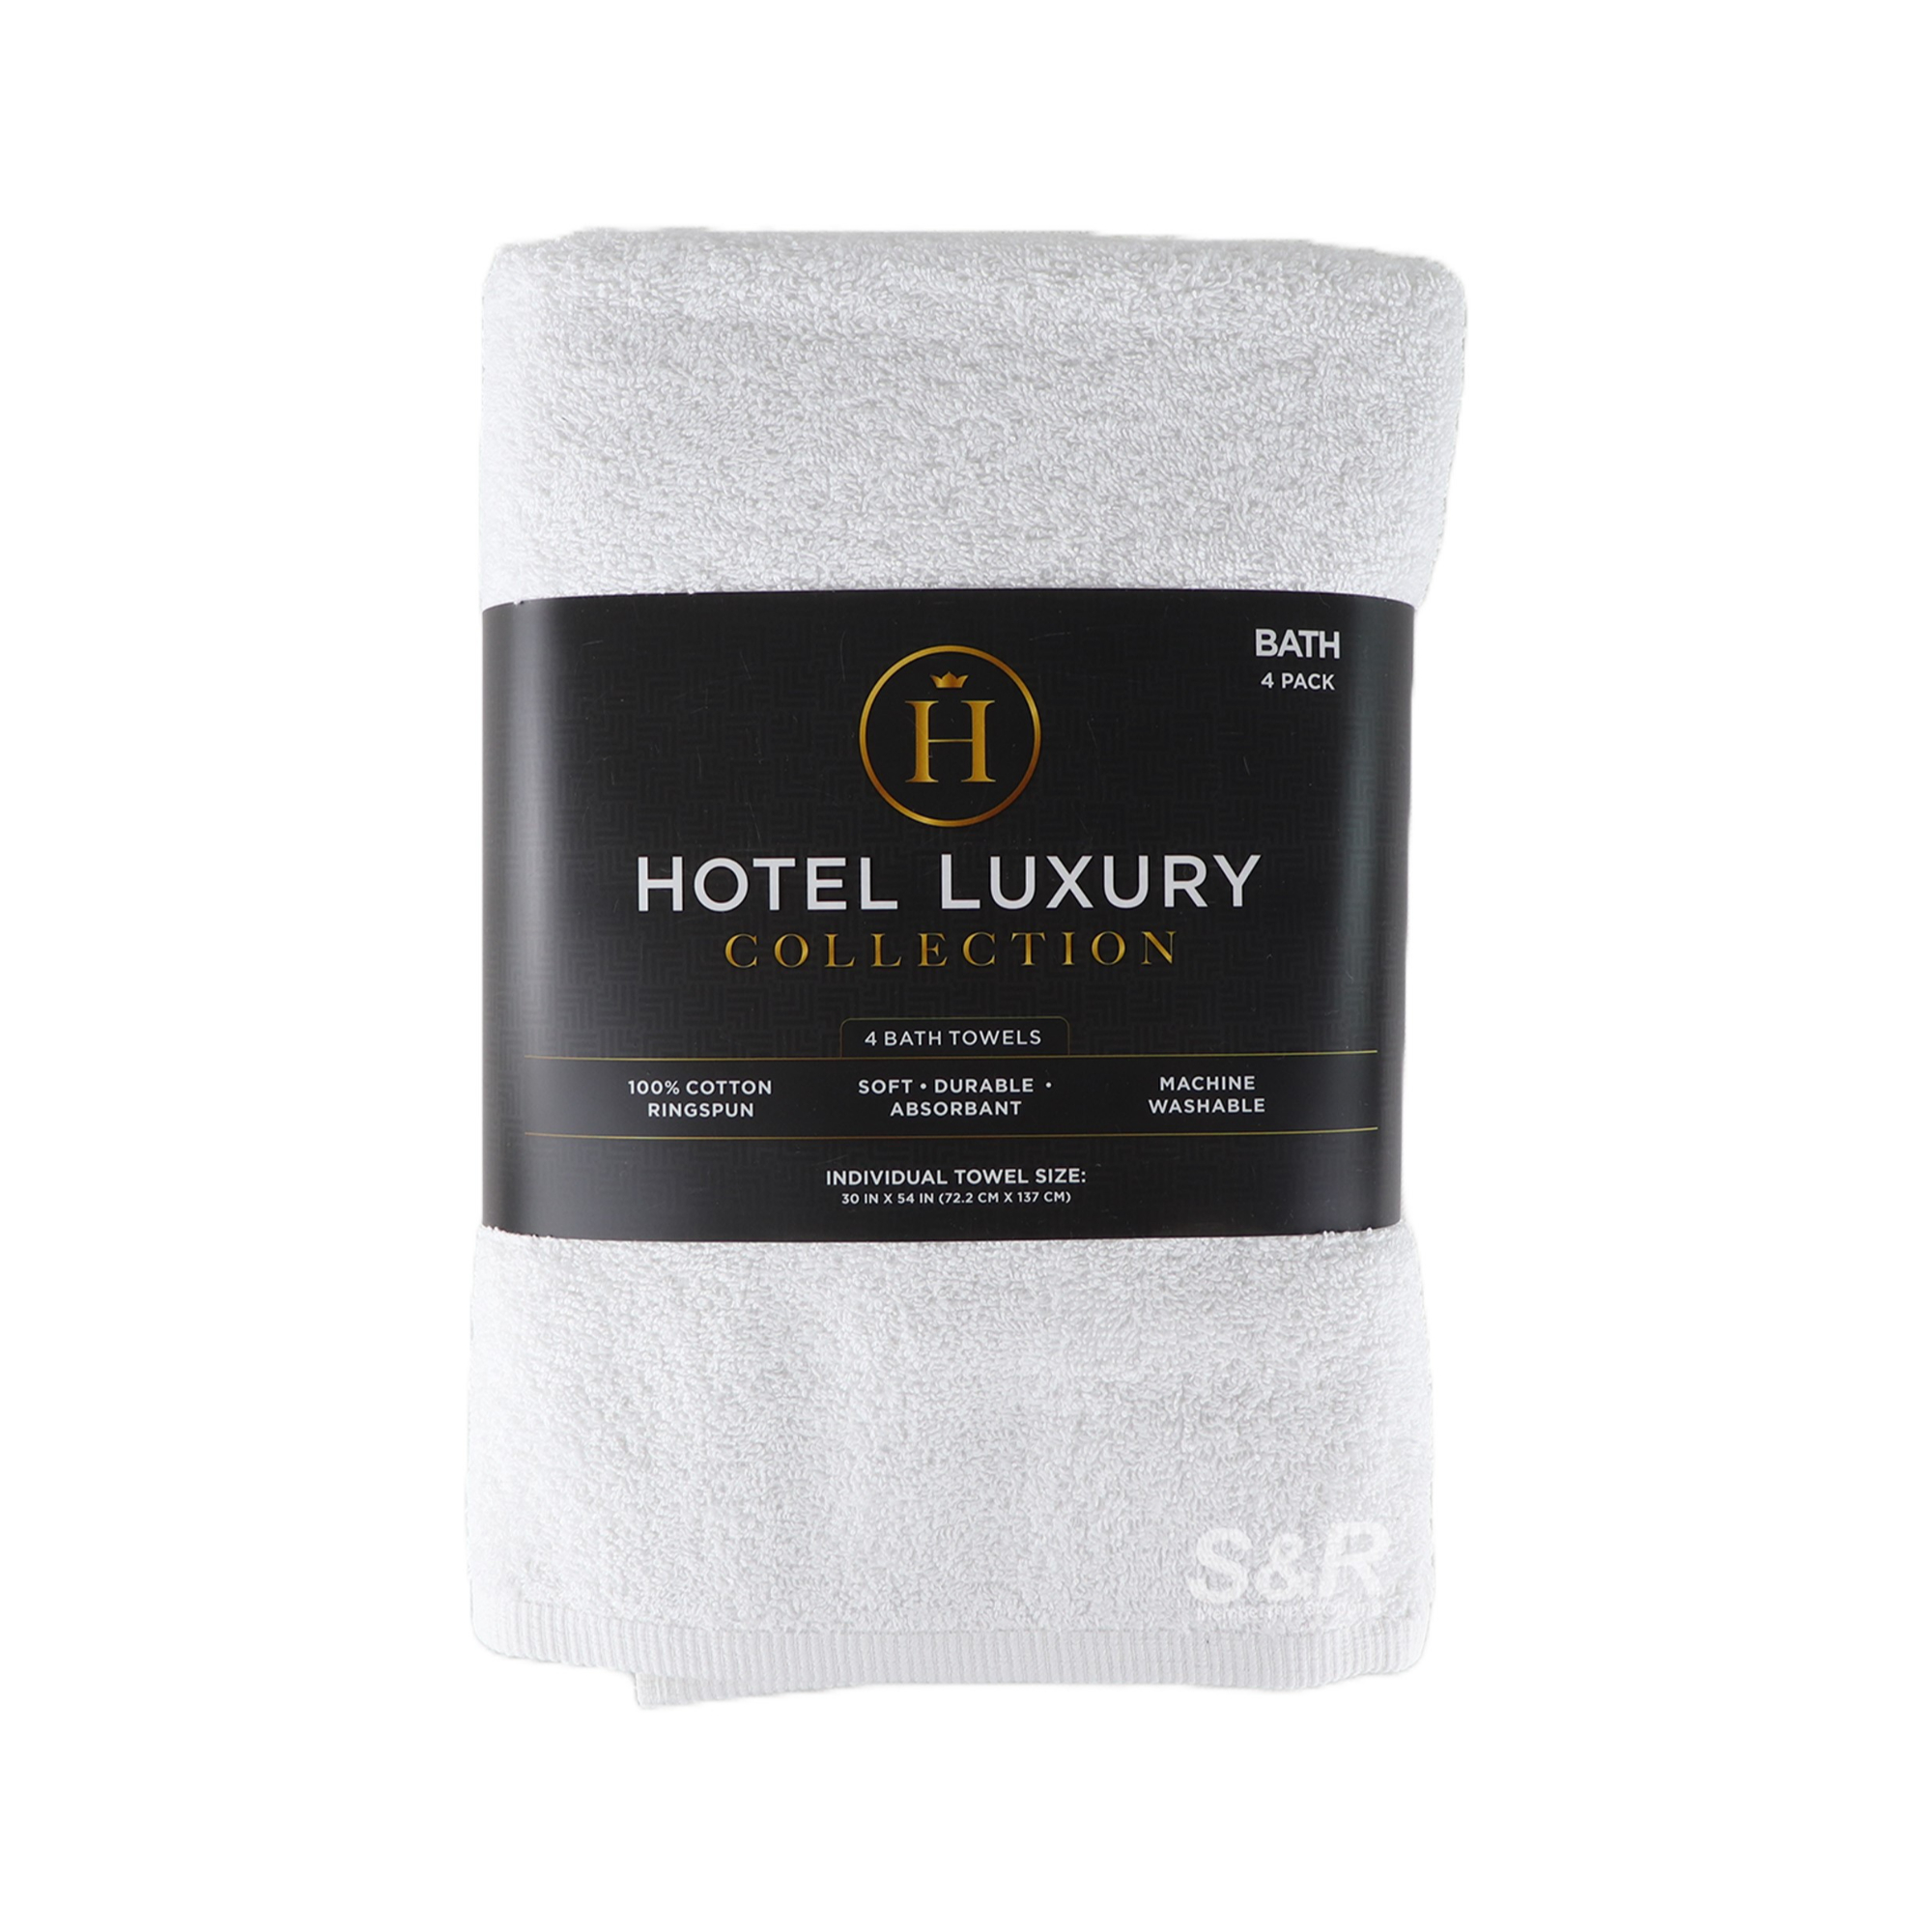 https://www.snrshopping.com/upload/product/Hotel-Luxury-Collection-Bath-Towels-4pcs-7108/Hotel%20Luxury%20Collection%20Bath%20Towels%204pcs-QL60EKOWVs.jpg